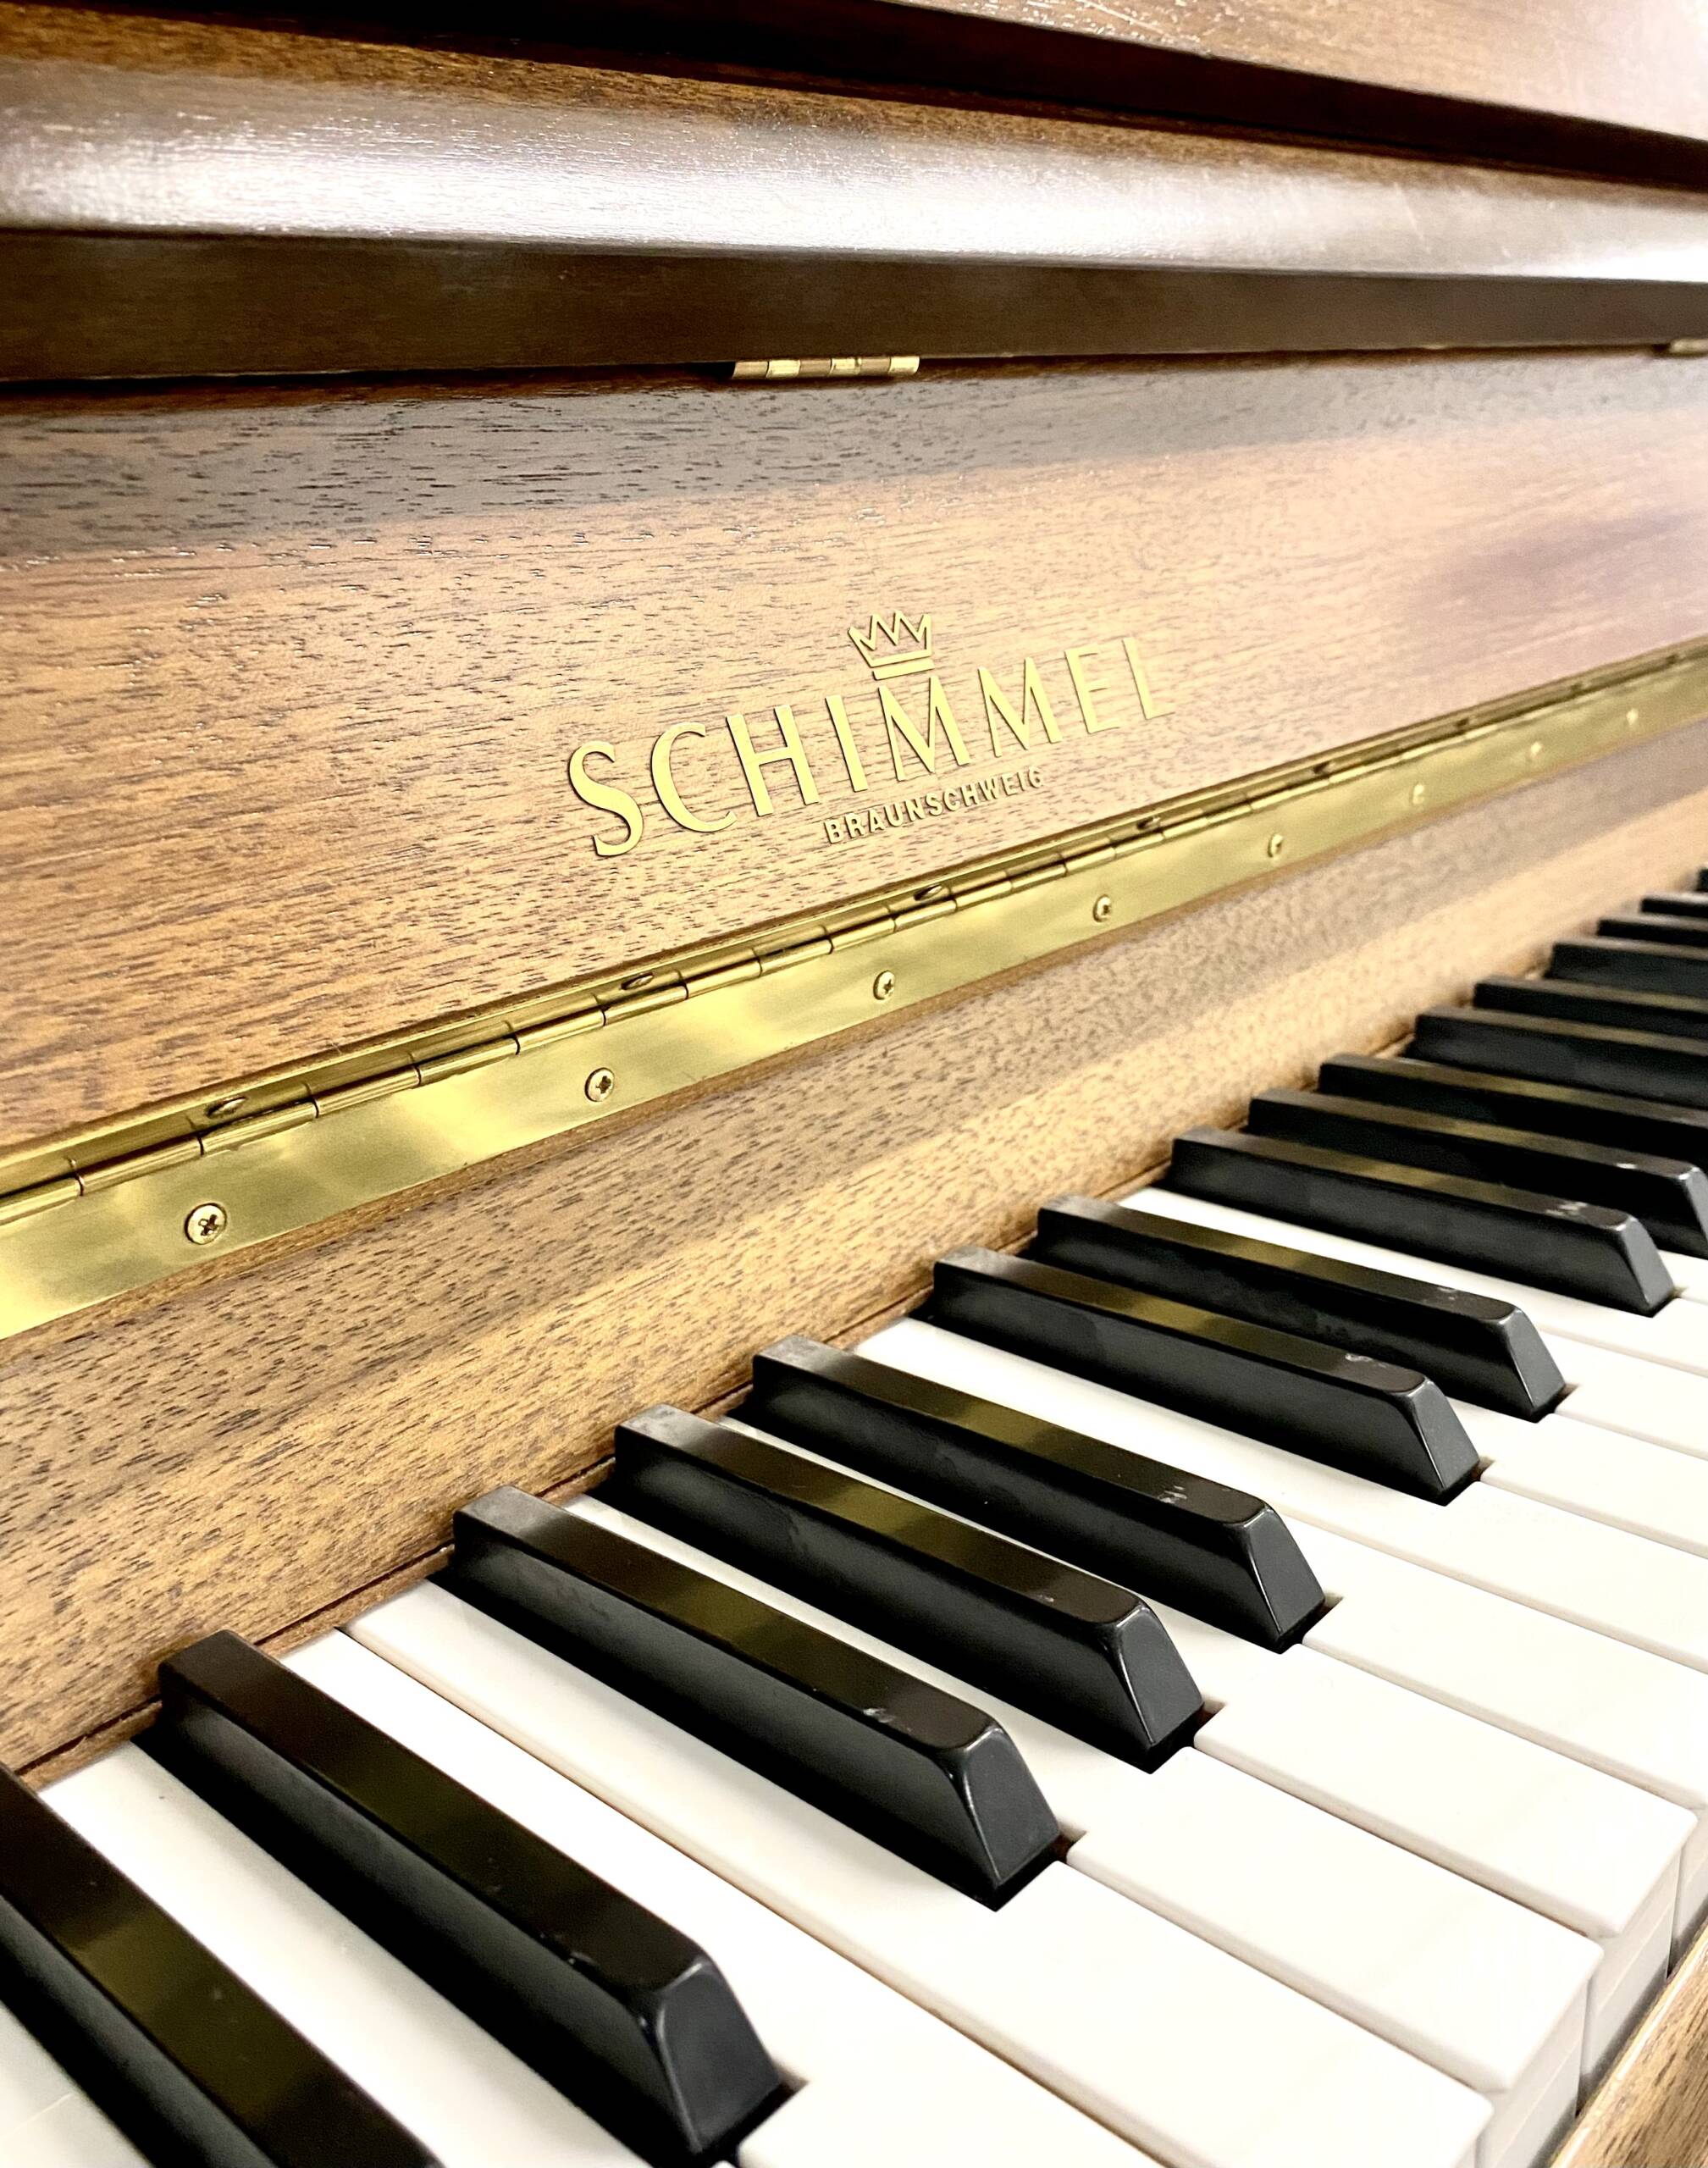 Used Schimmel Upright Piano